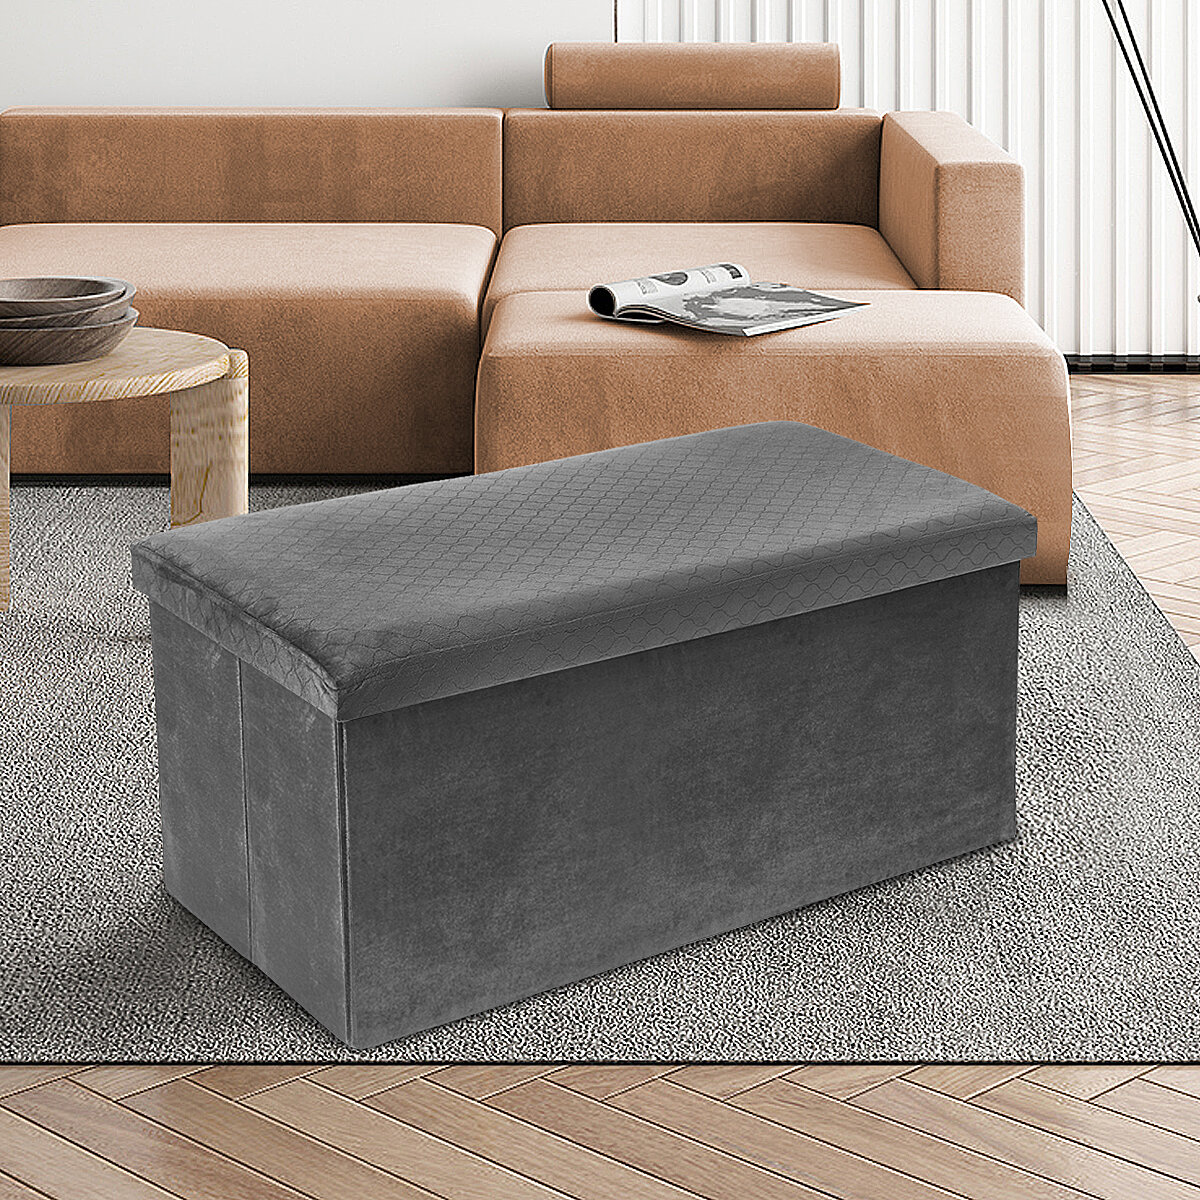 Image of Storage Ottoman Bench Modern Tufted Ottoman for Bedroom Living-Room End of Bed Hallway Ottoman Foot Rest with Storage